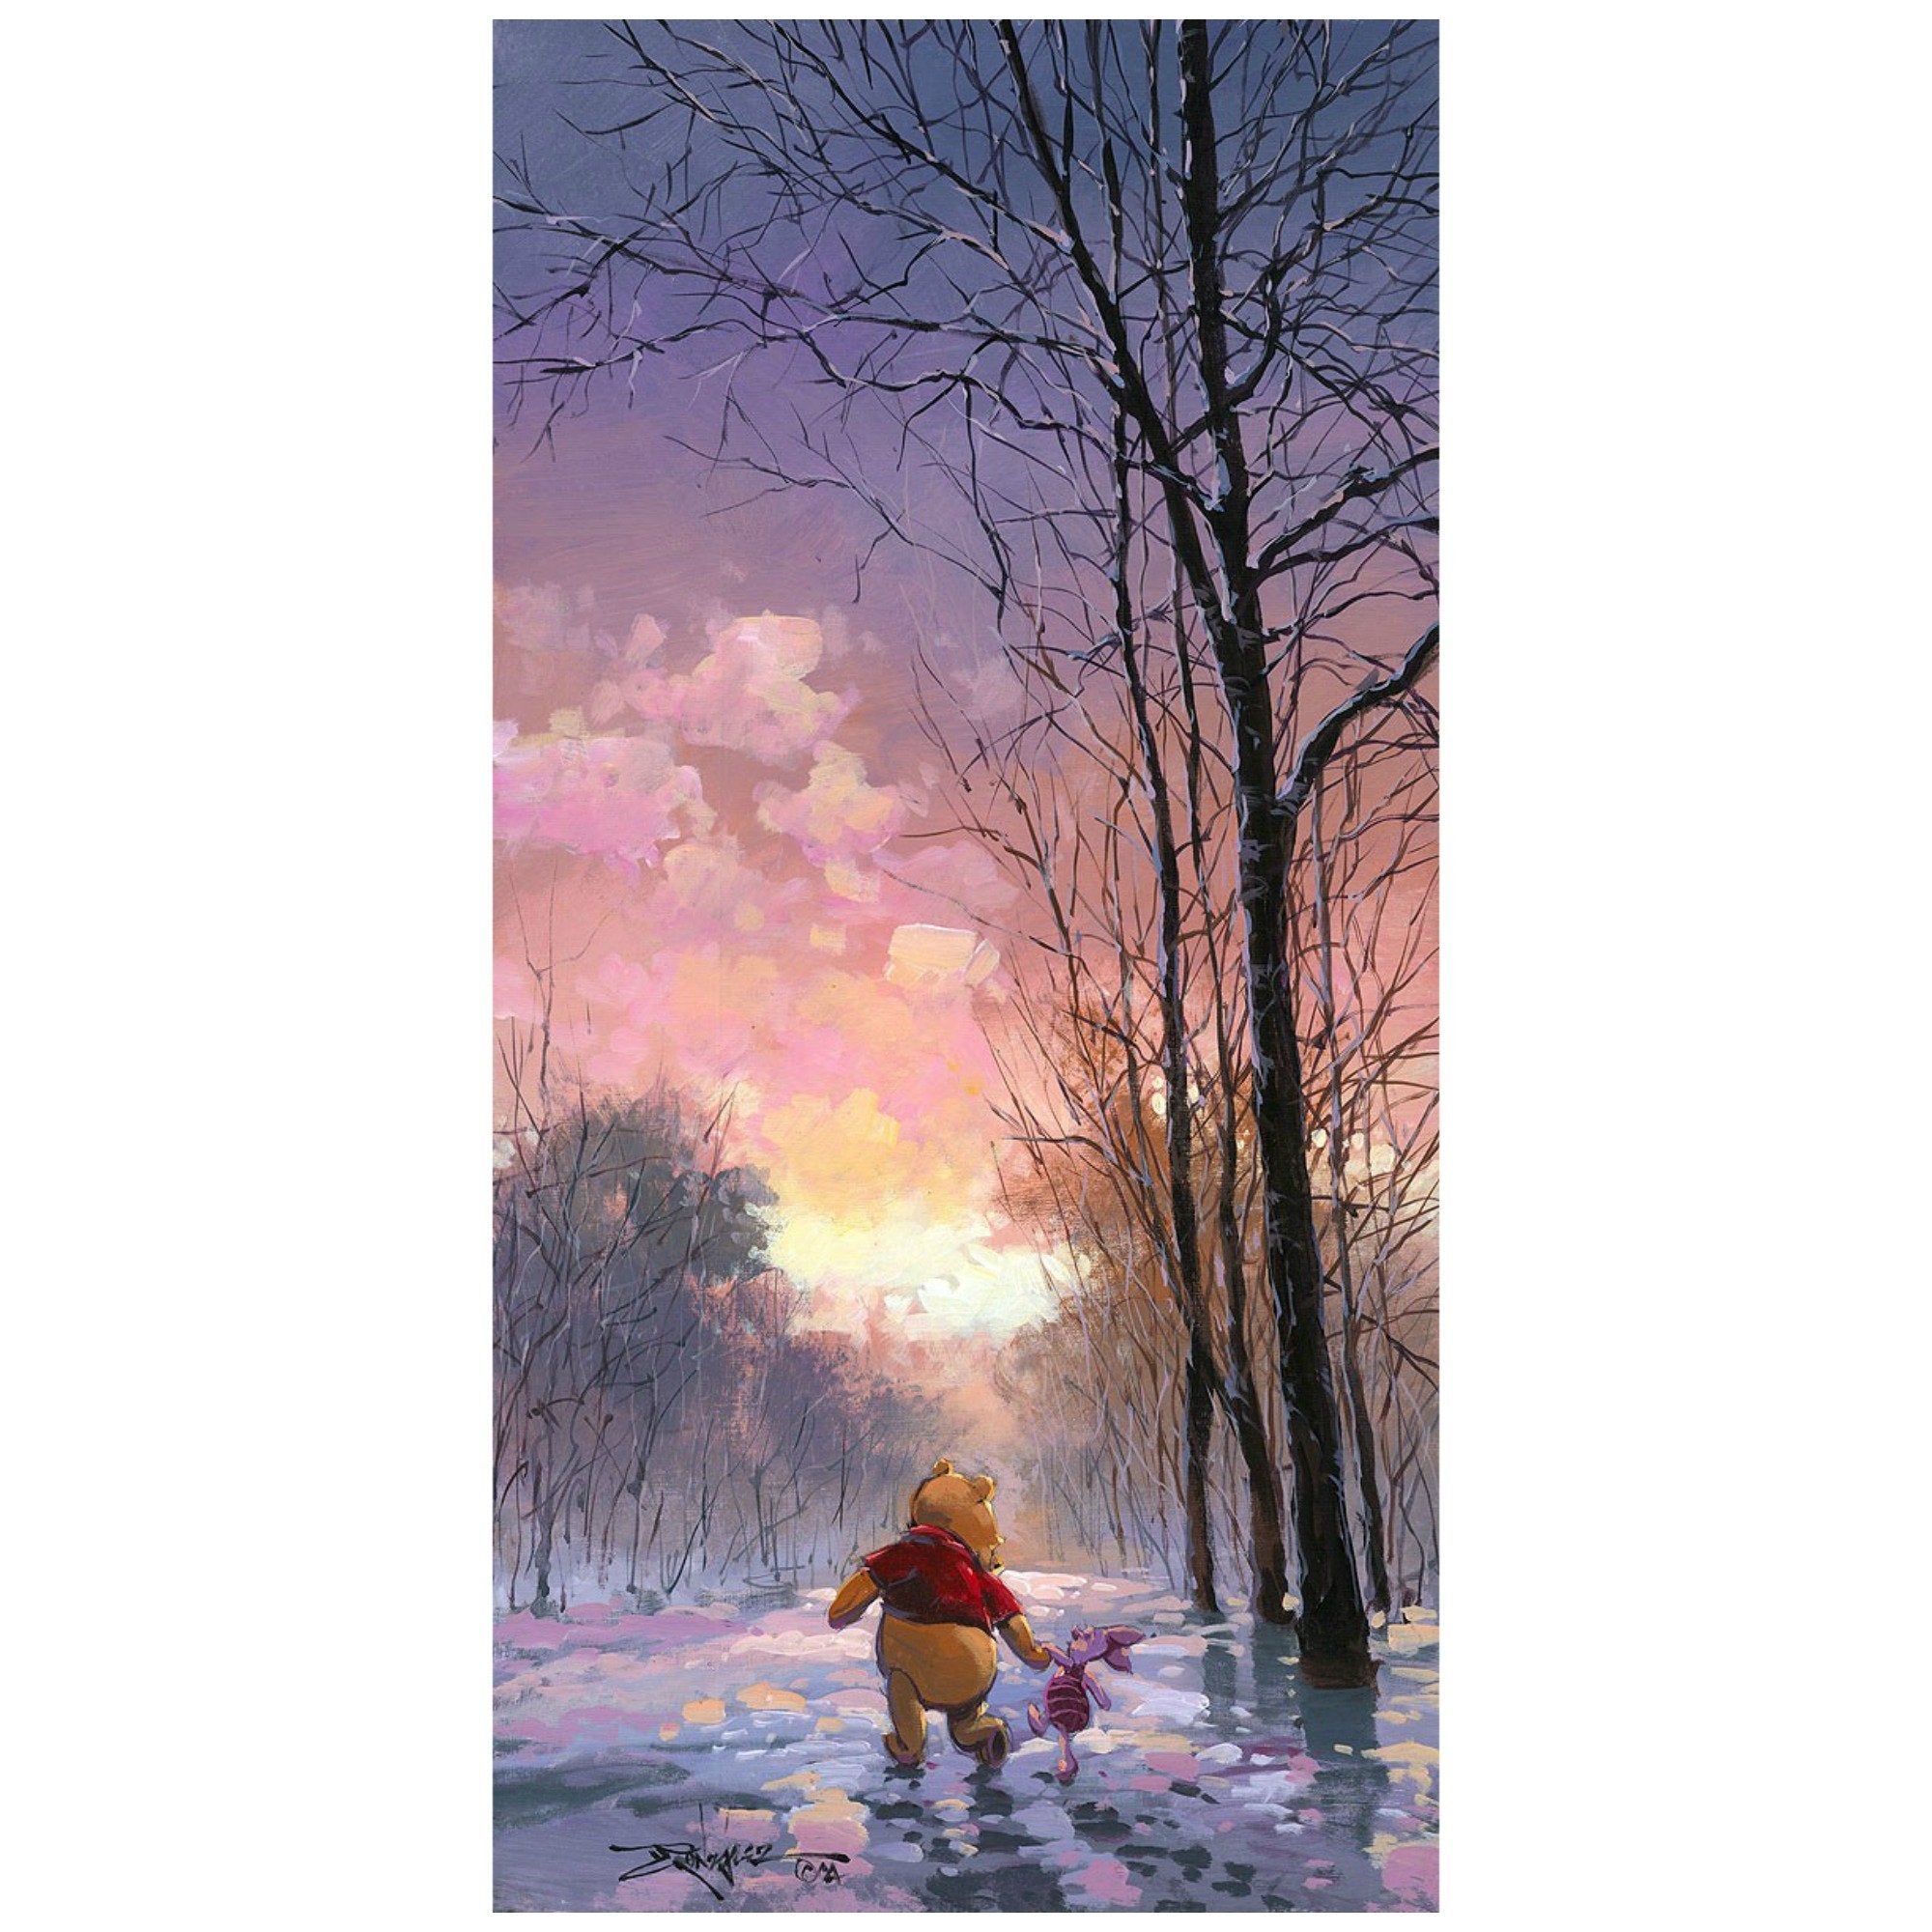 Snowy Path by Rodel Gonzalez.  Winnie the Pooh and his friend Piglet take a winter day stroll through a snowy path. 